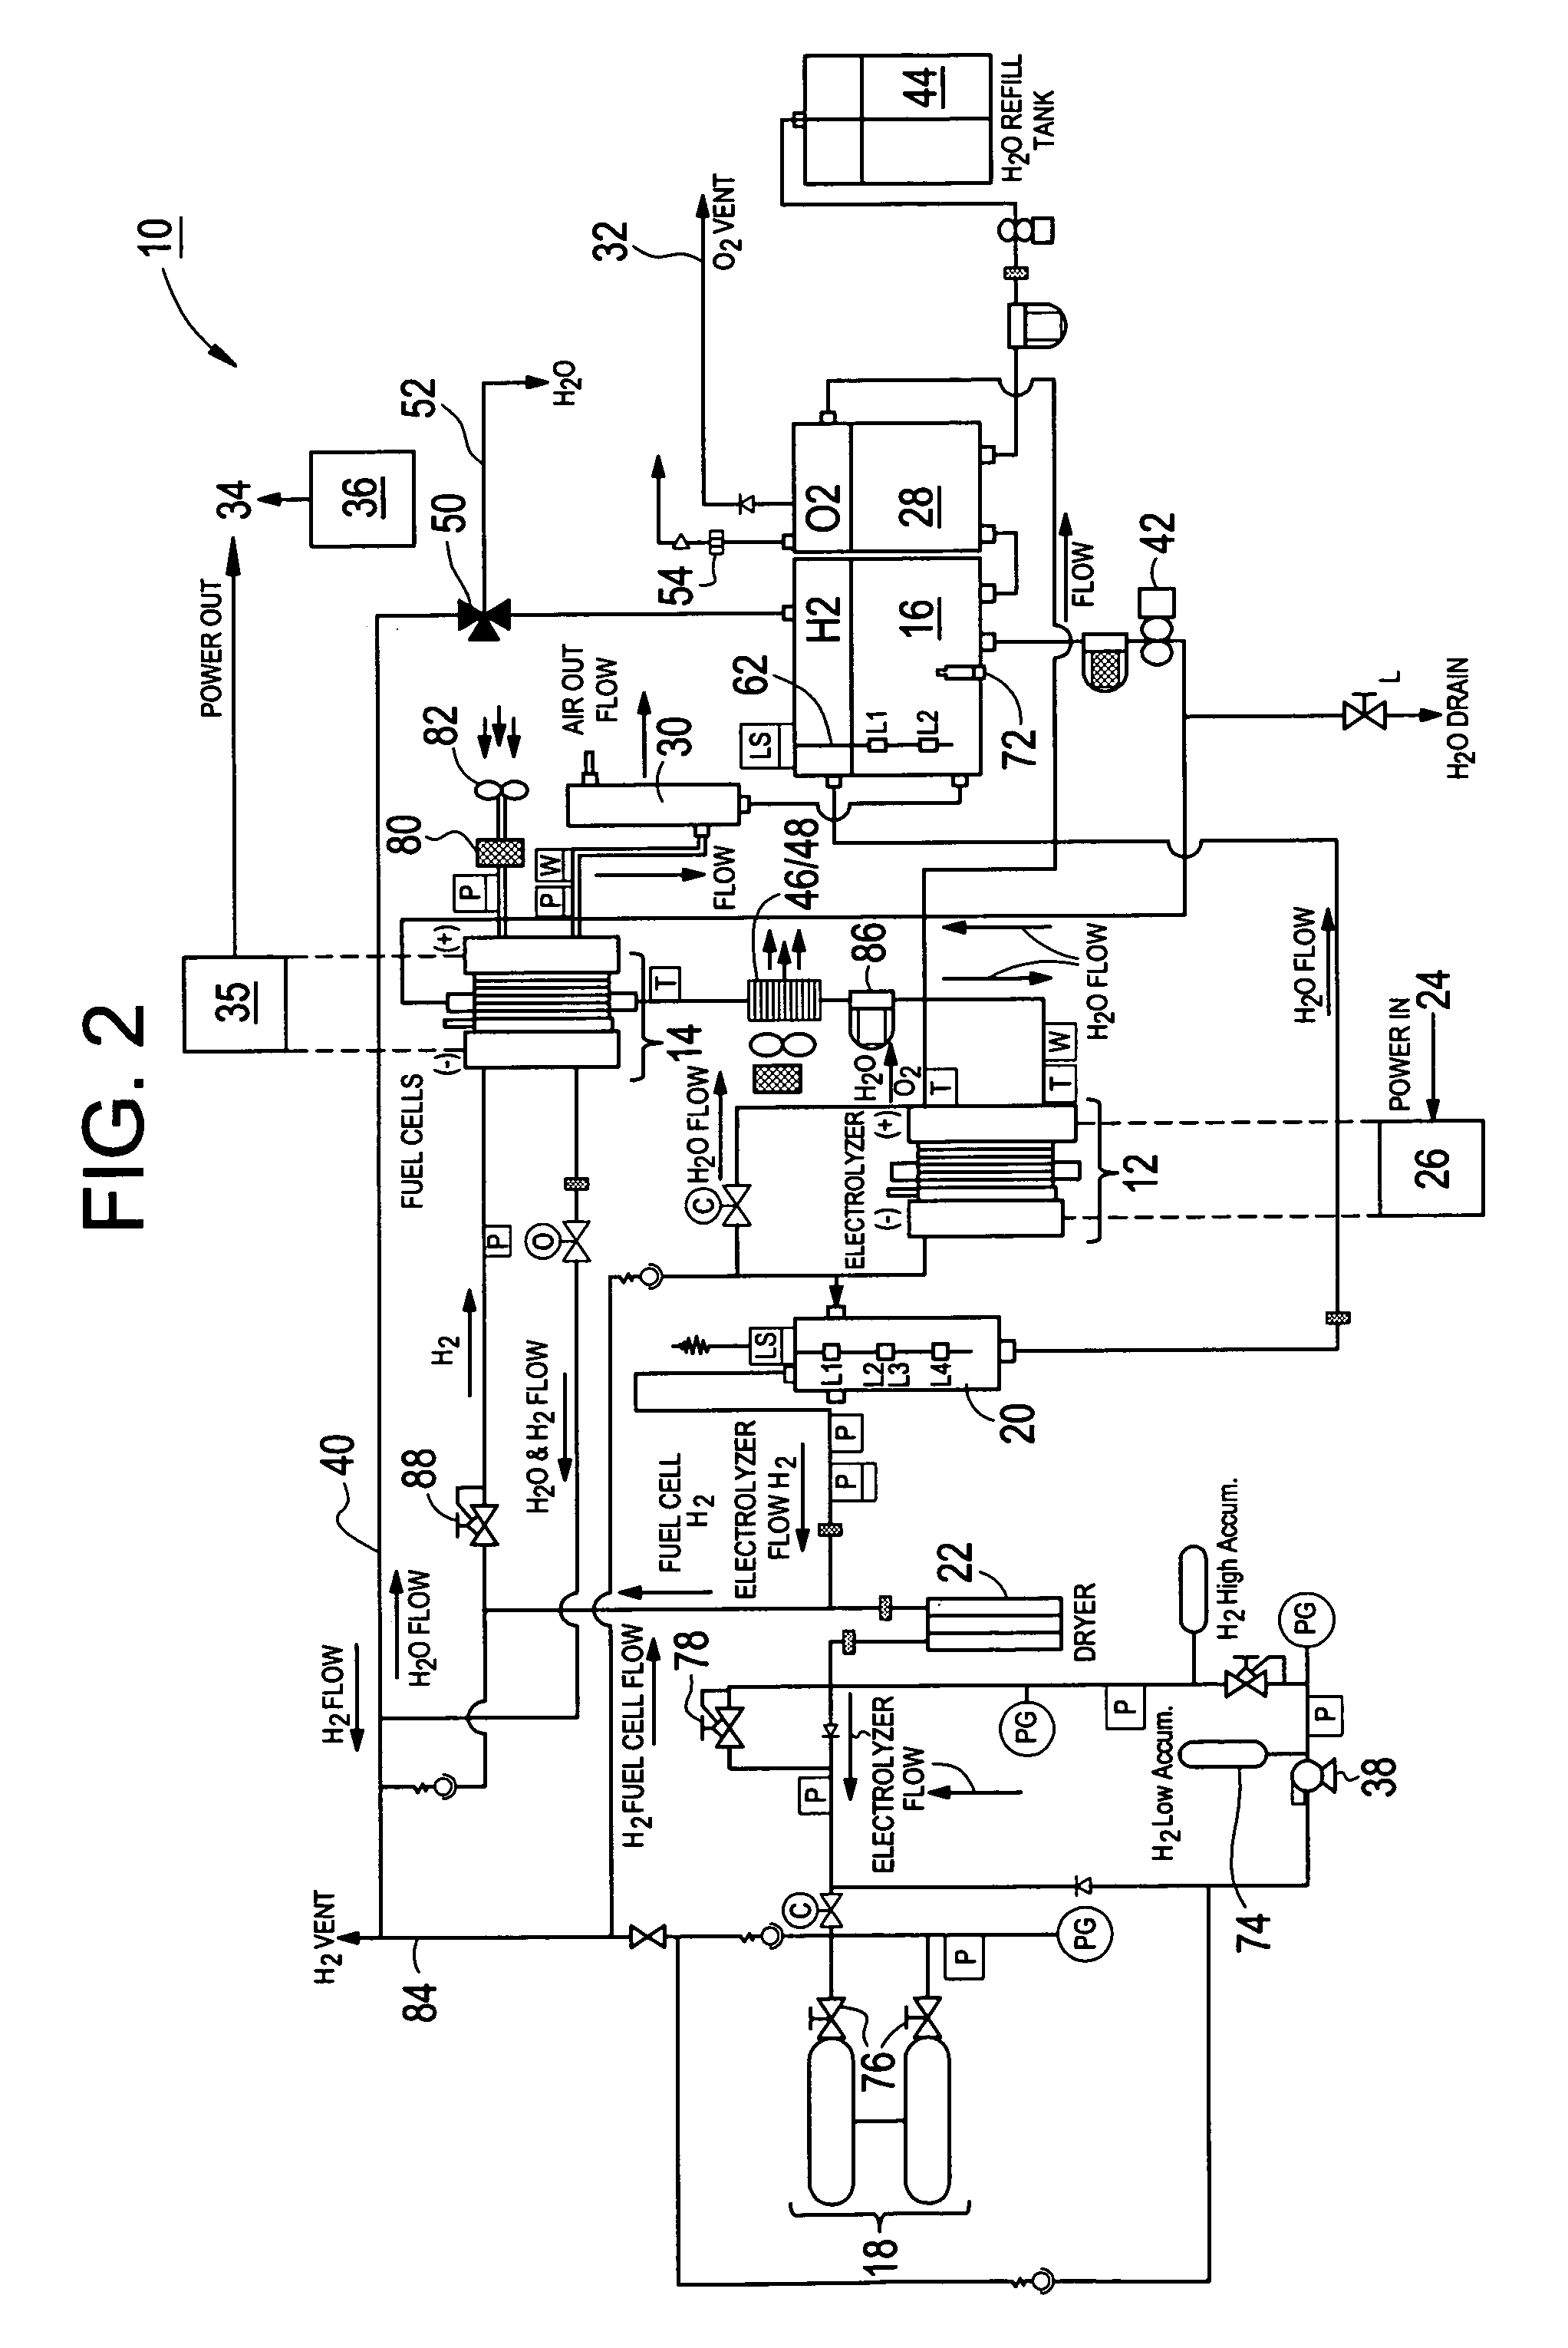 Drainage system and process for operating a regenerative electrochemical cell system